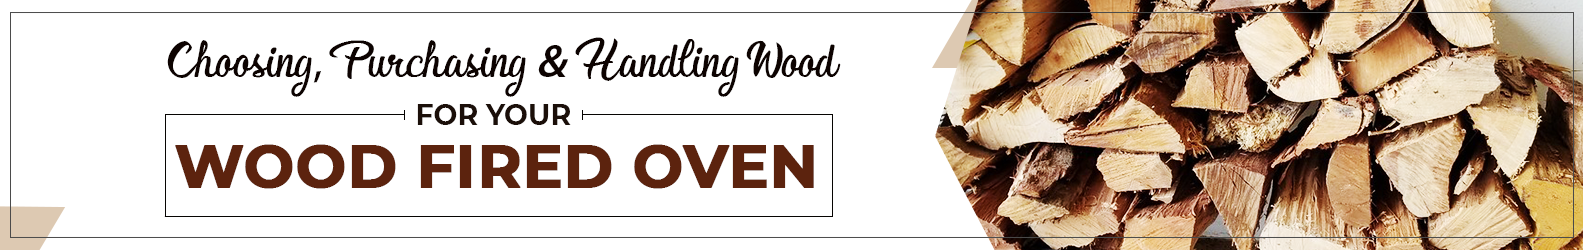 Choosing, Purchasing and handling wood for your wood fired oven